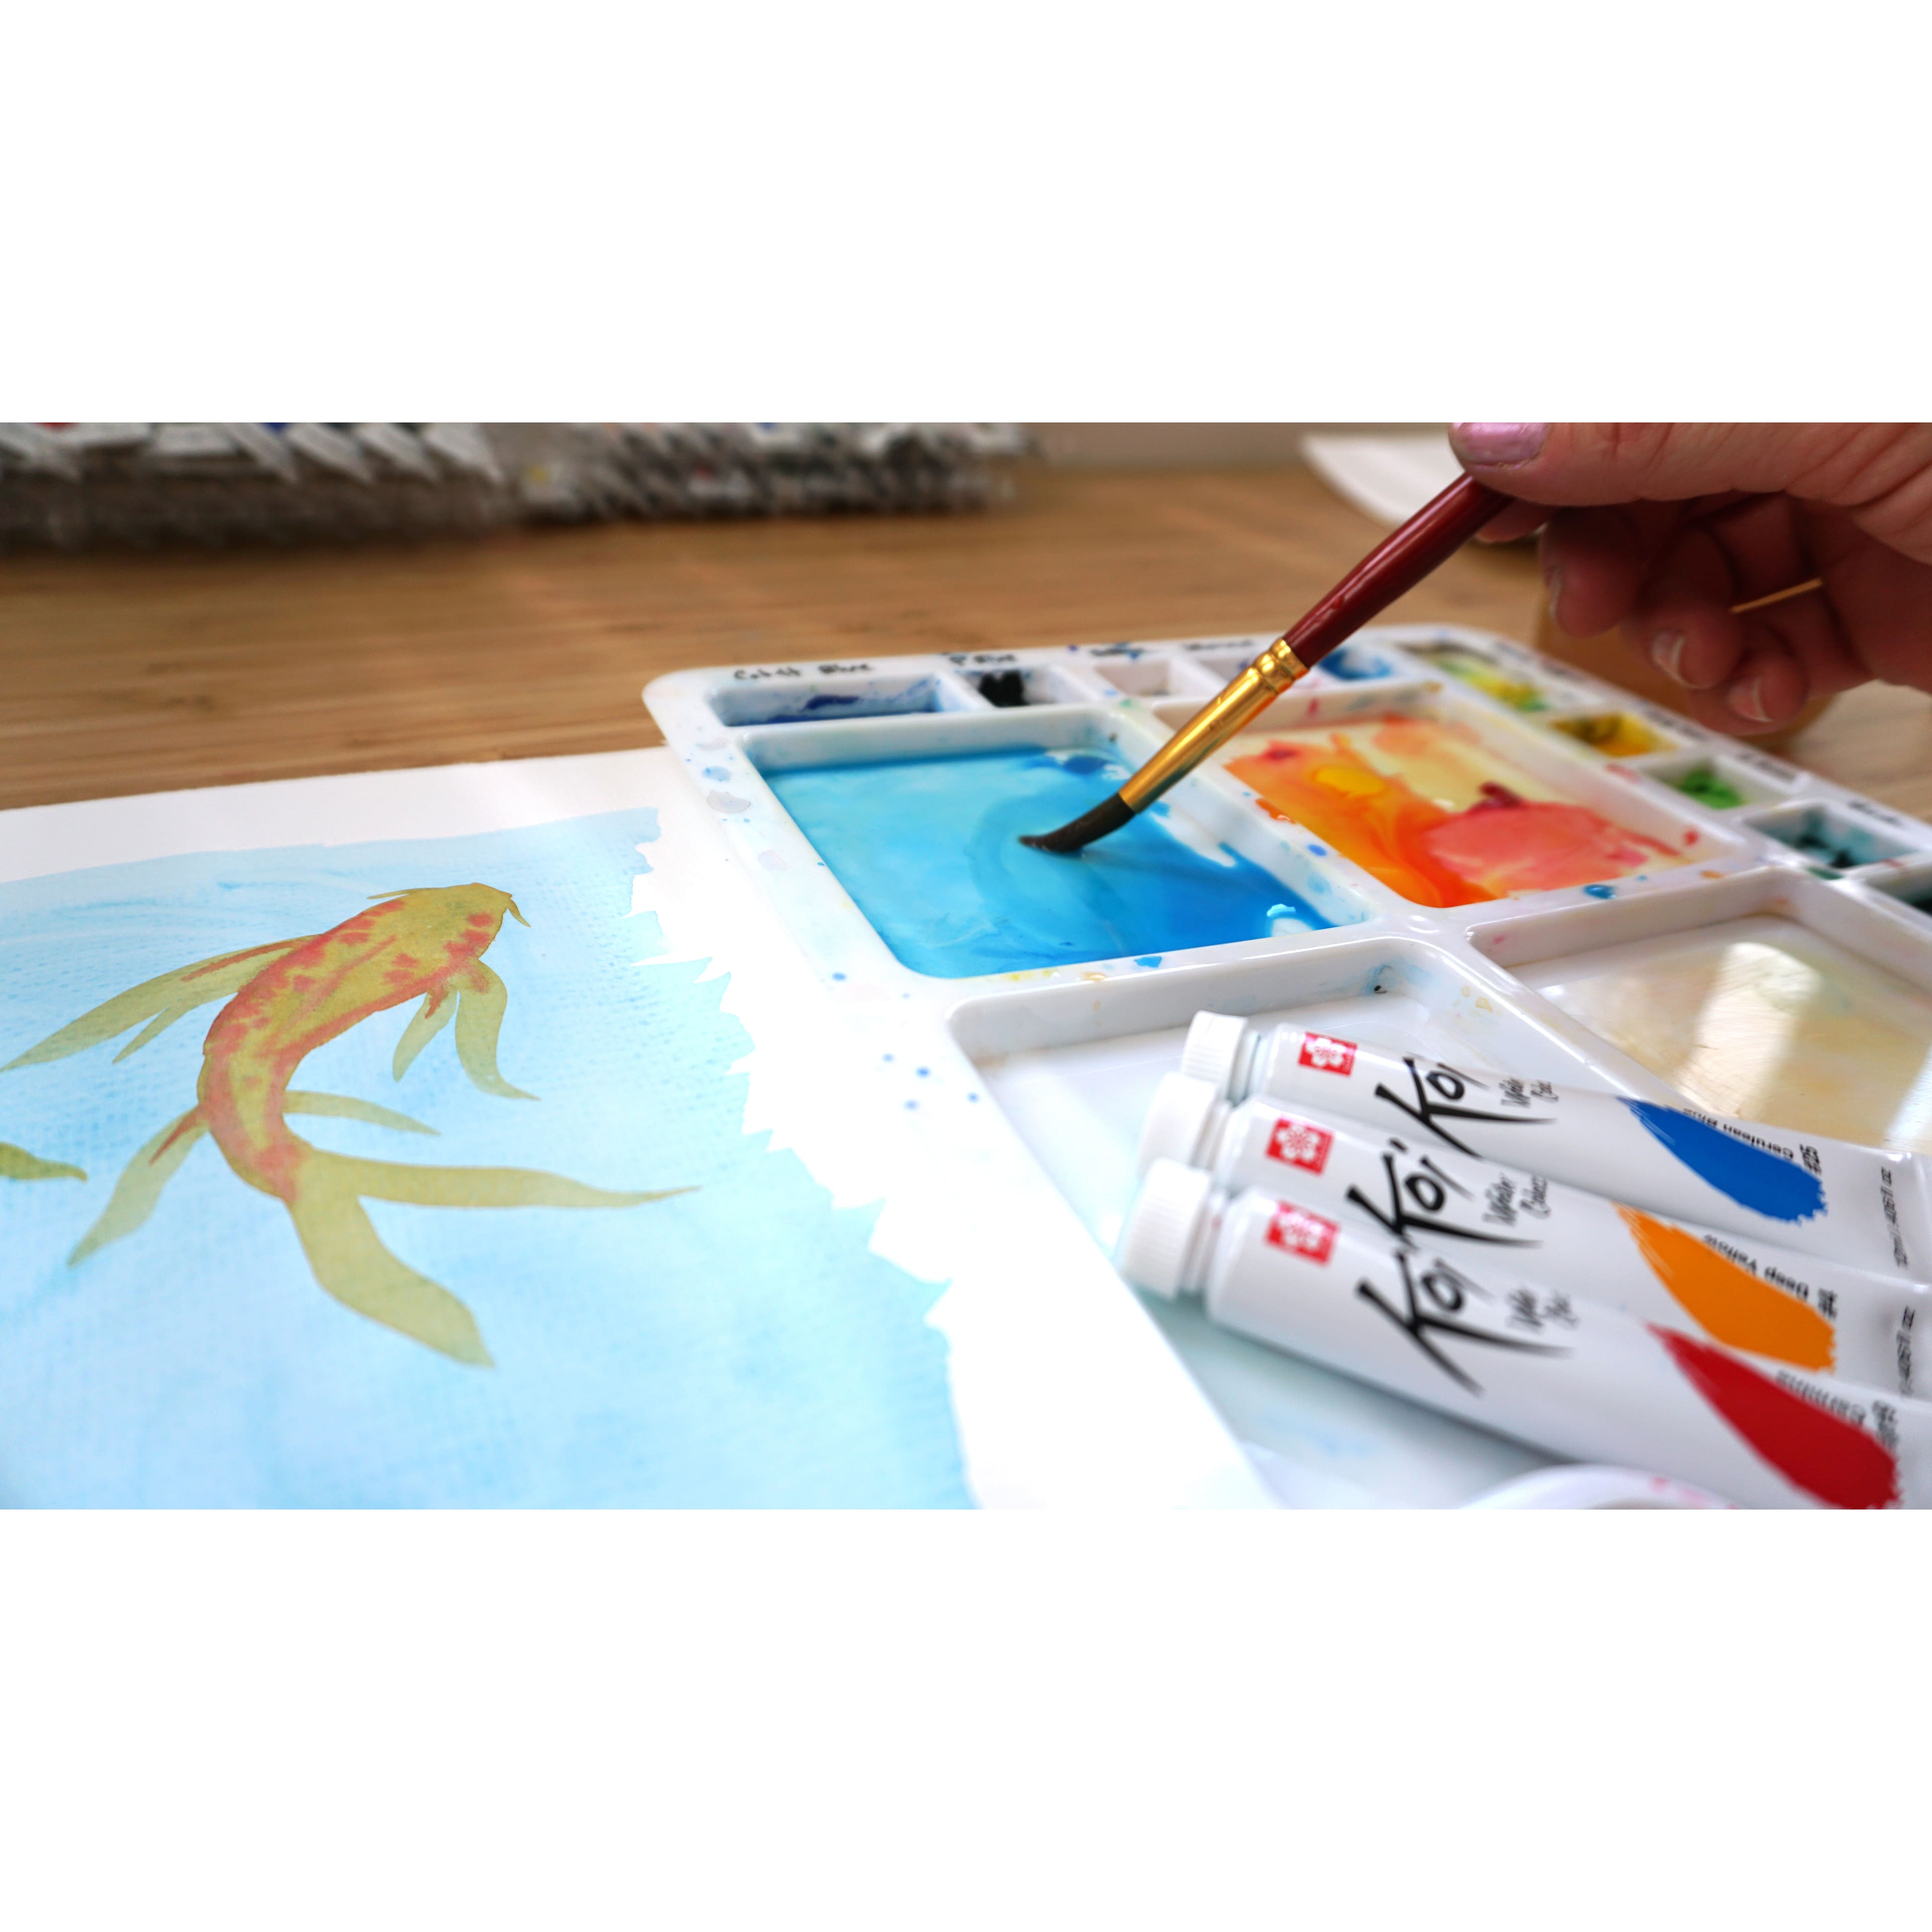 Koi Water Colors&#x2122; 12 Color Fine Quality Watercolors